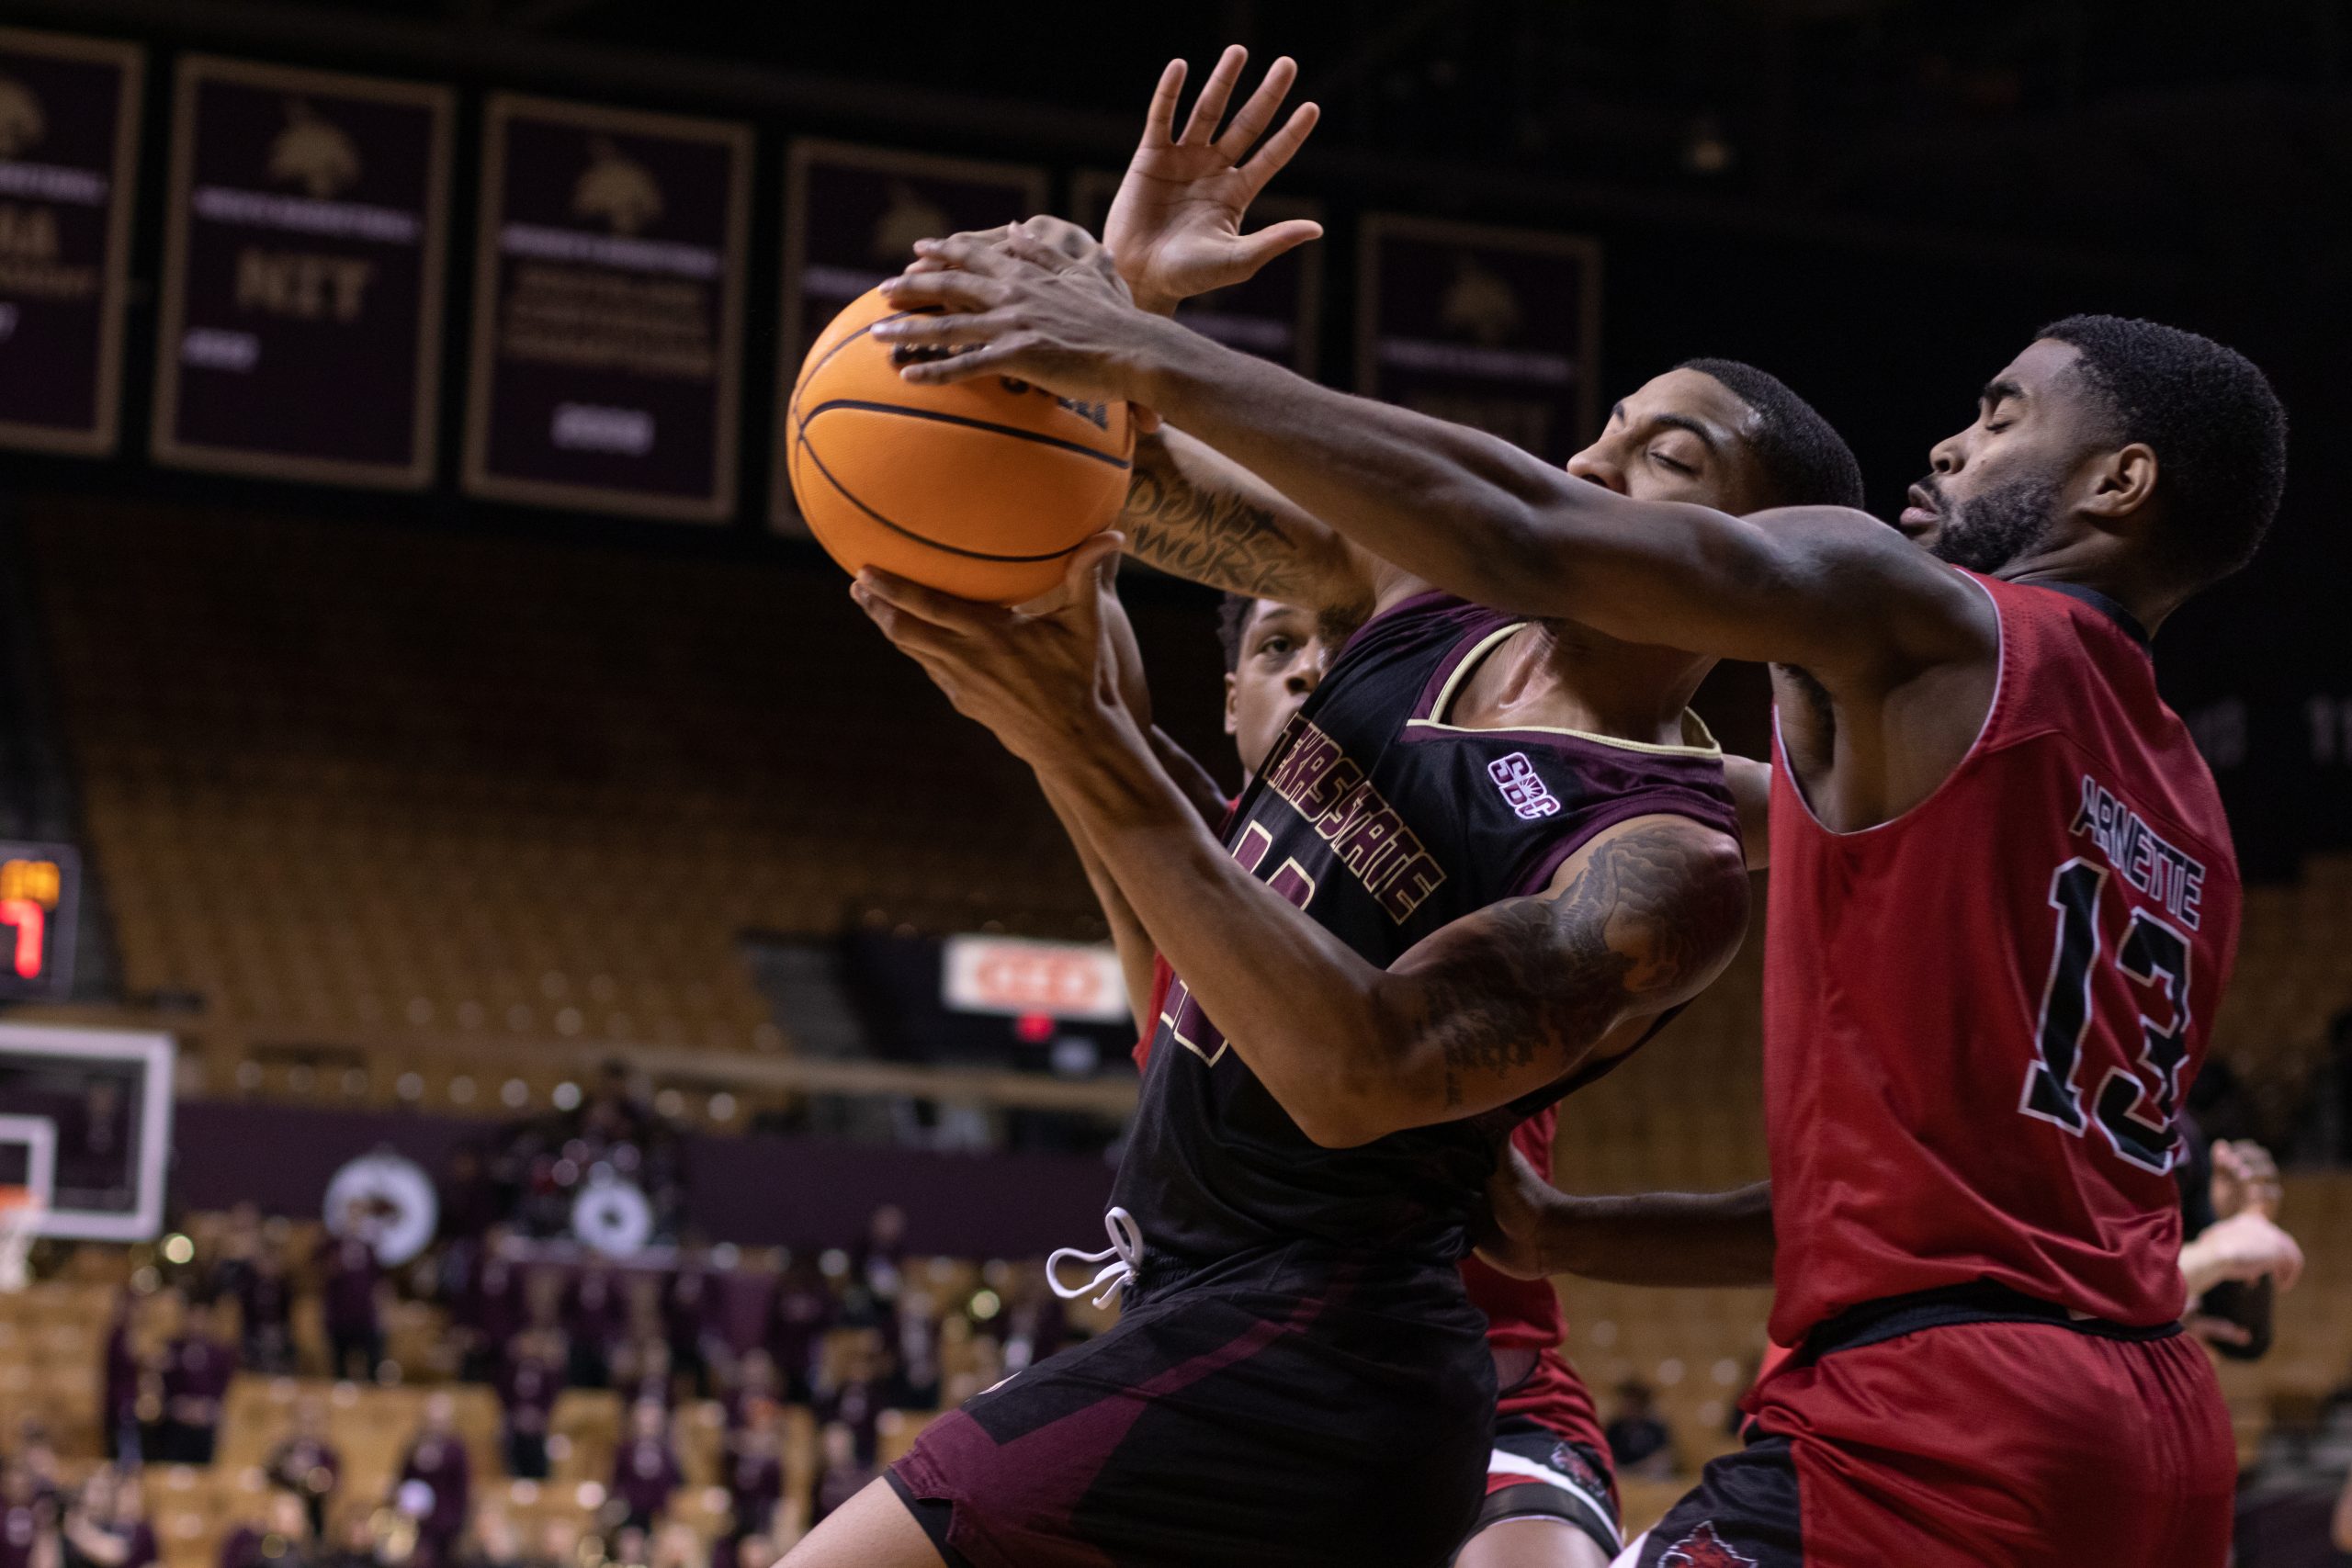 Mens+Basketball+against+Arkansas+State+University%3A+A+Photo+Gallery